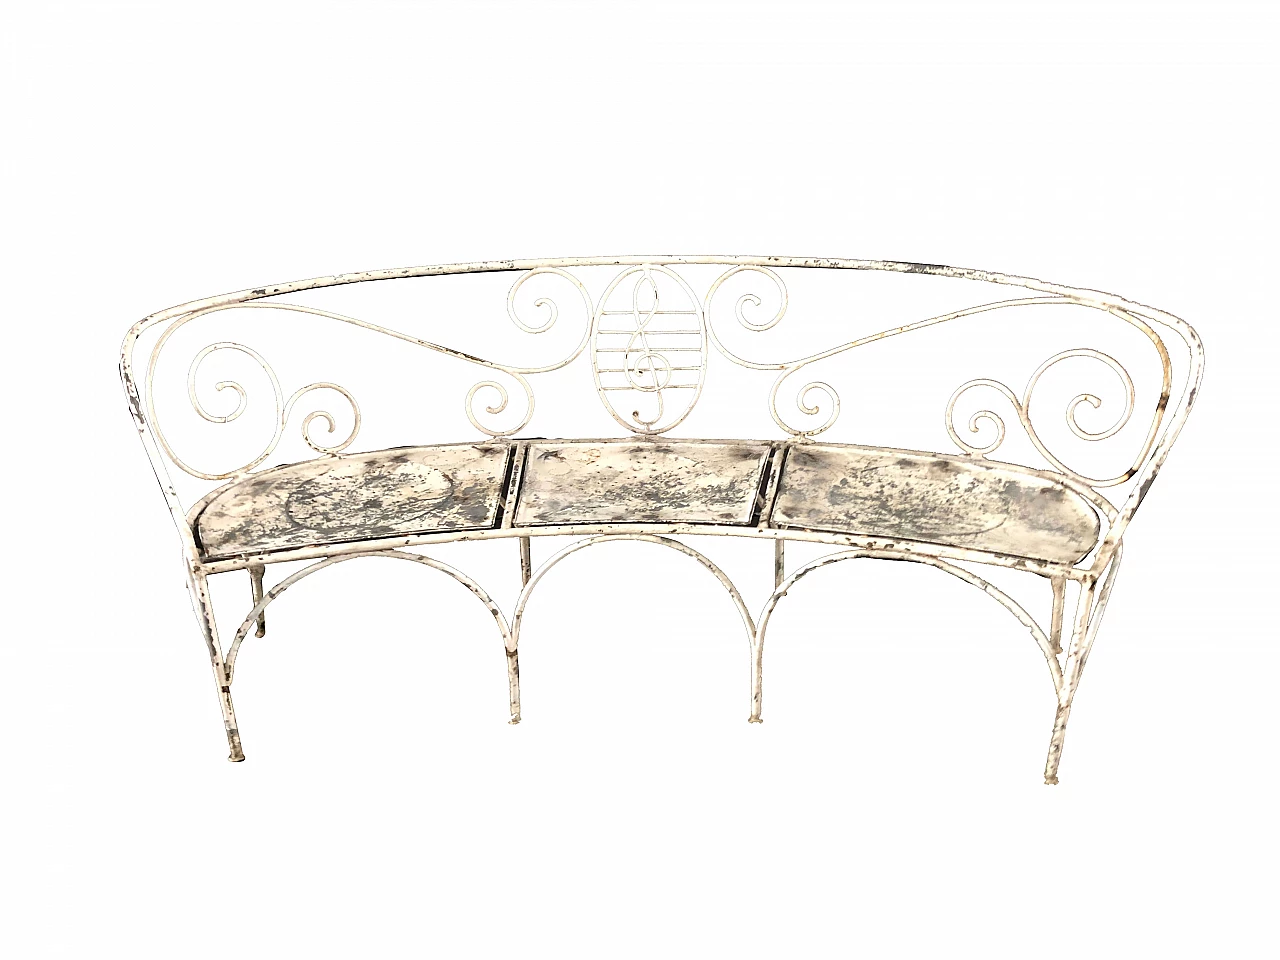 Semicircular bench in wrought iron, 1950s 1302296